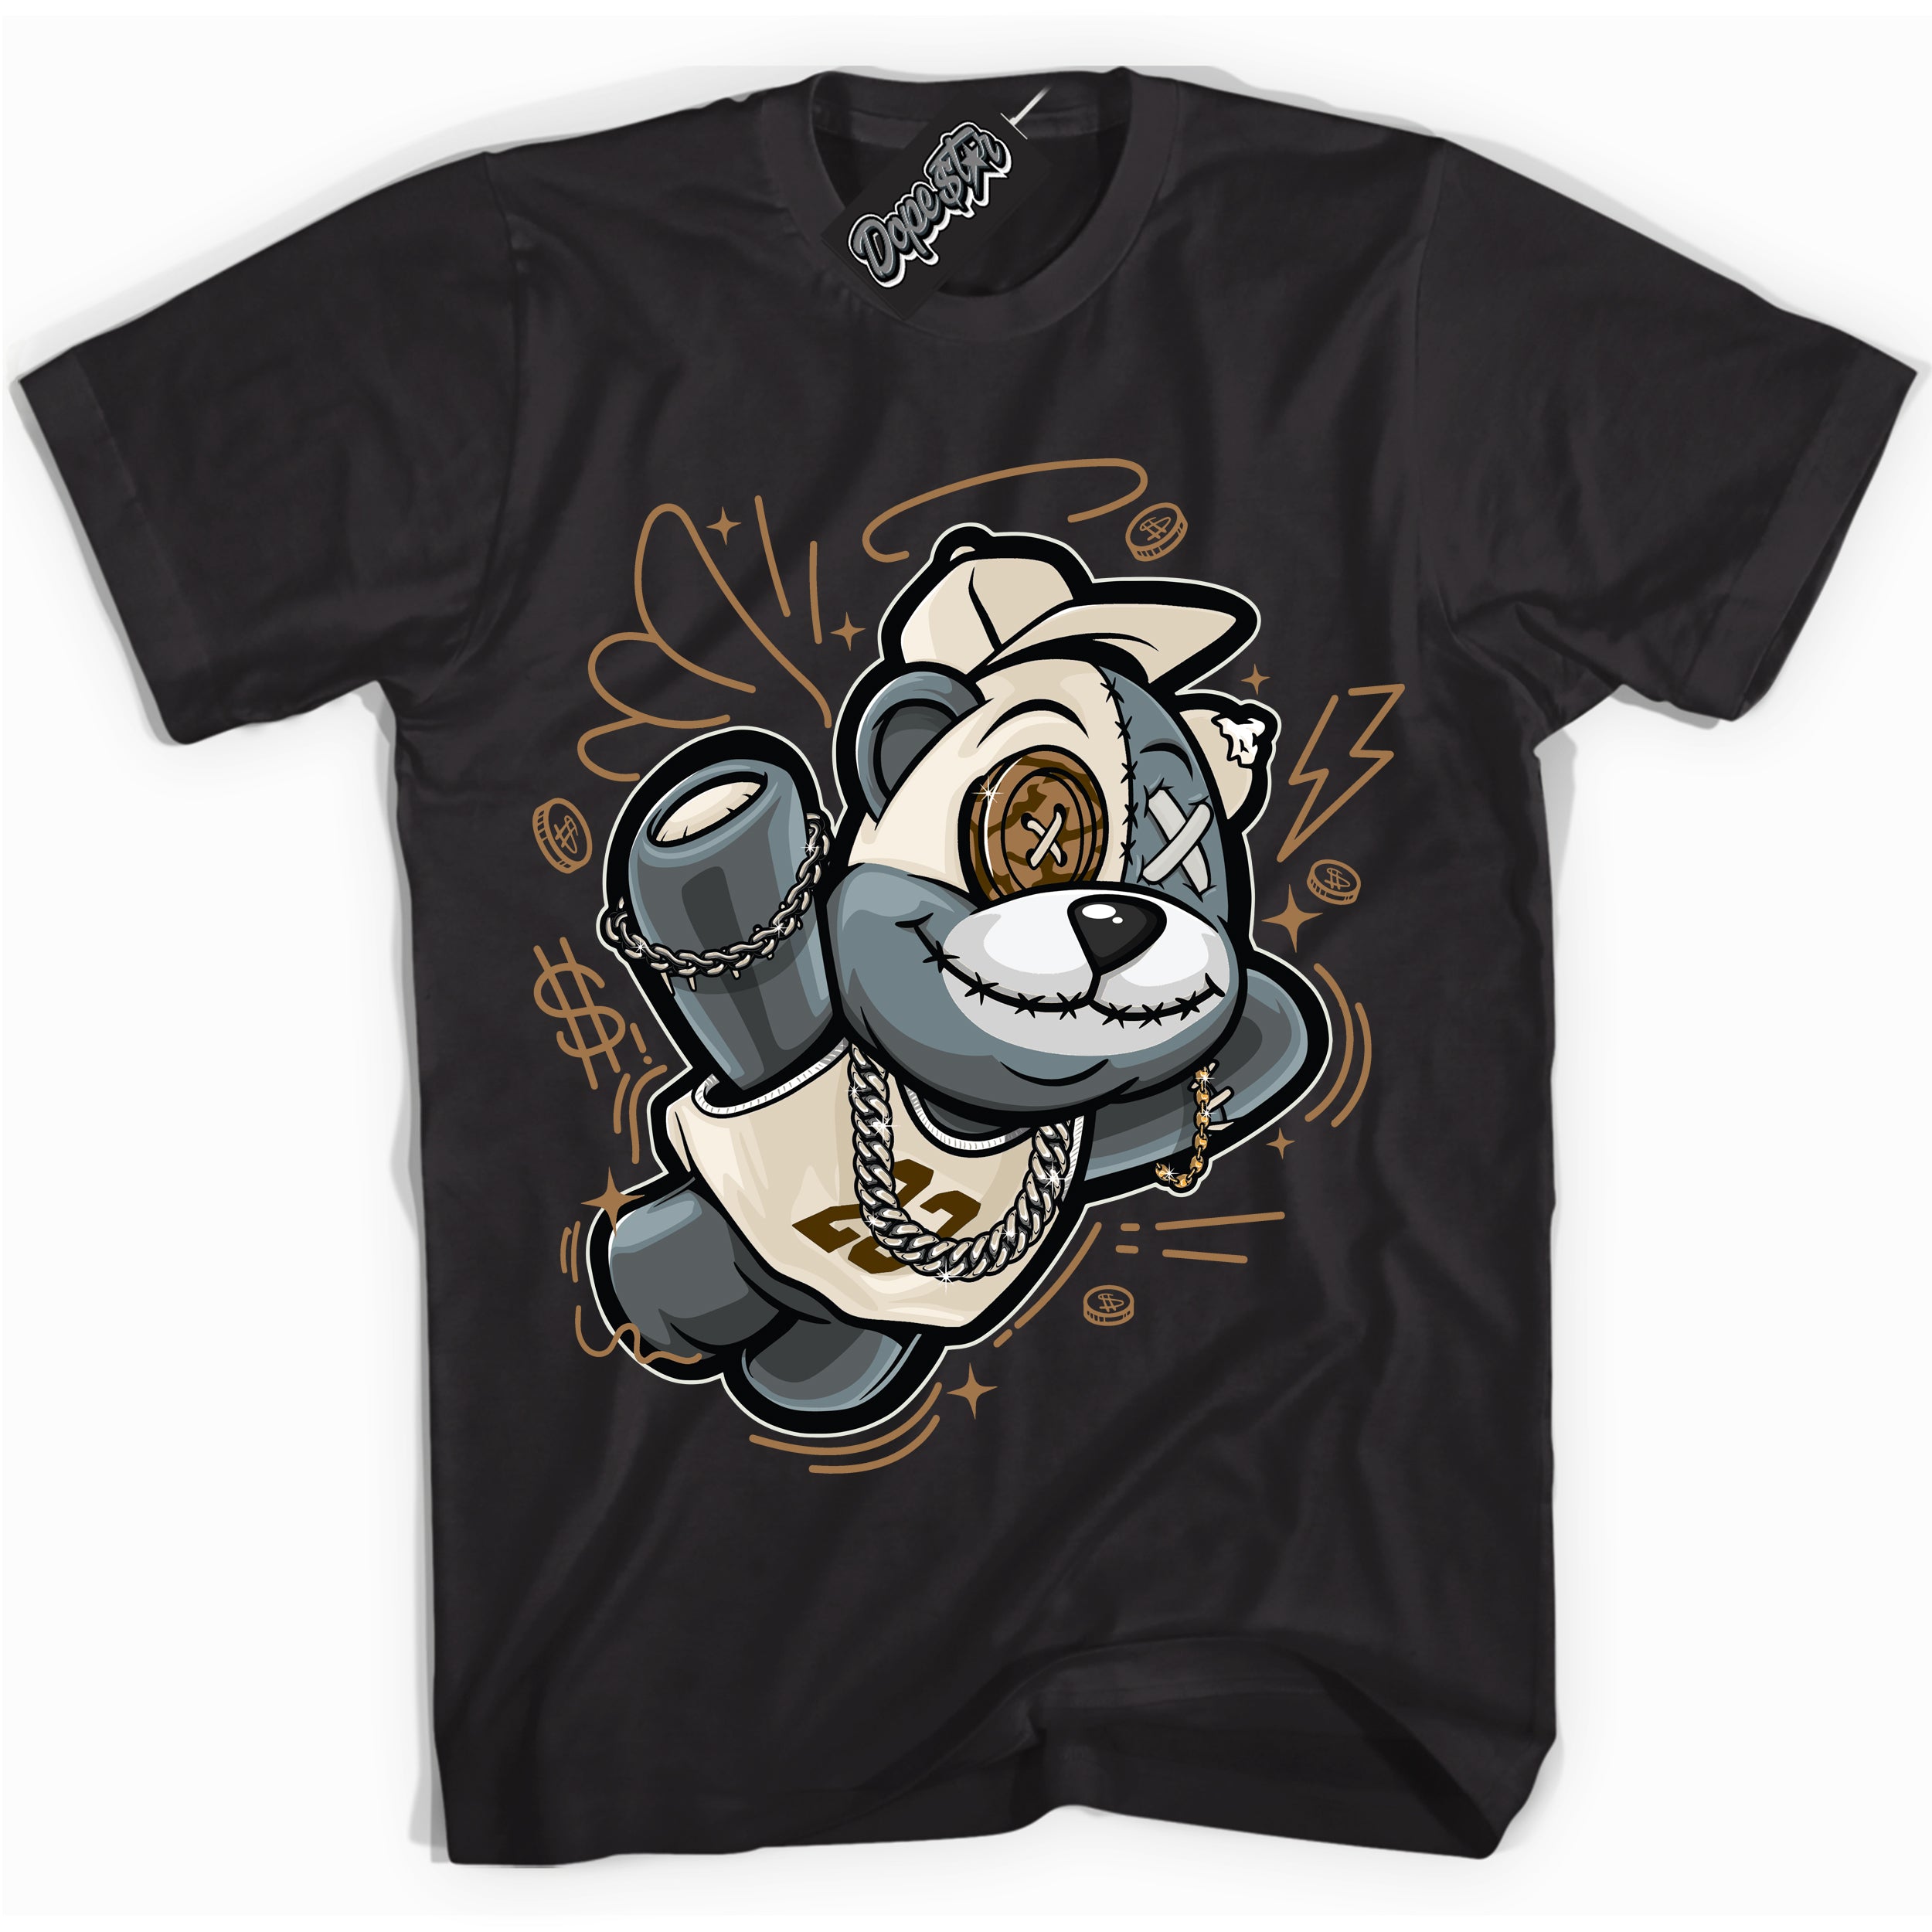 Cool Black graphic tee with “ Slam Dunk Bear ” design, that perfectly matches Palomino 3s sneakers 